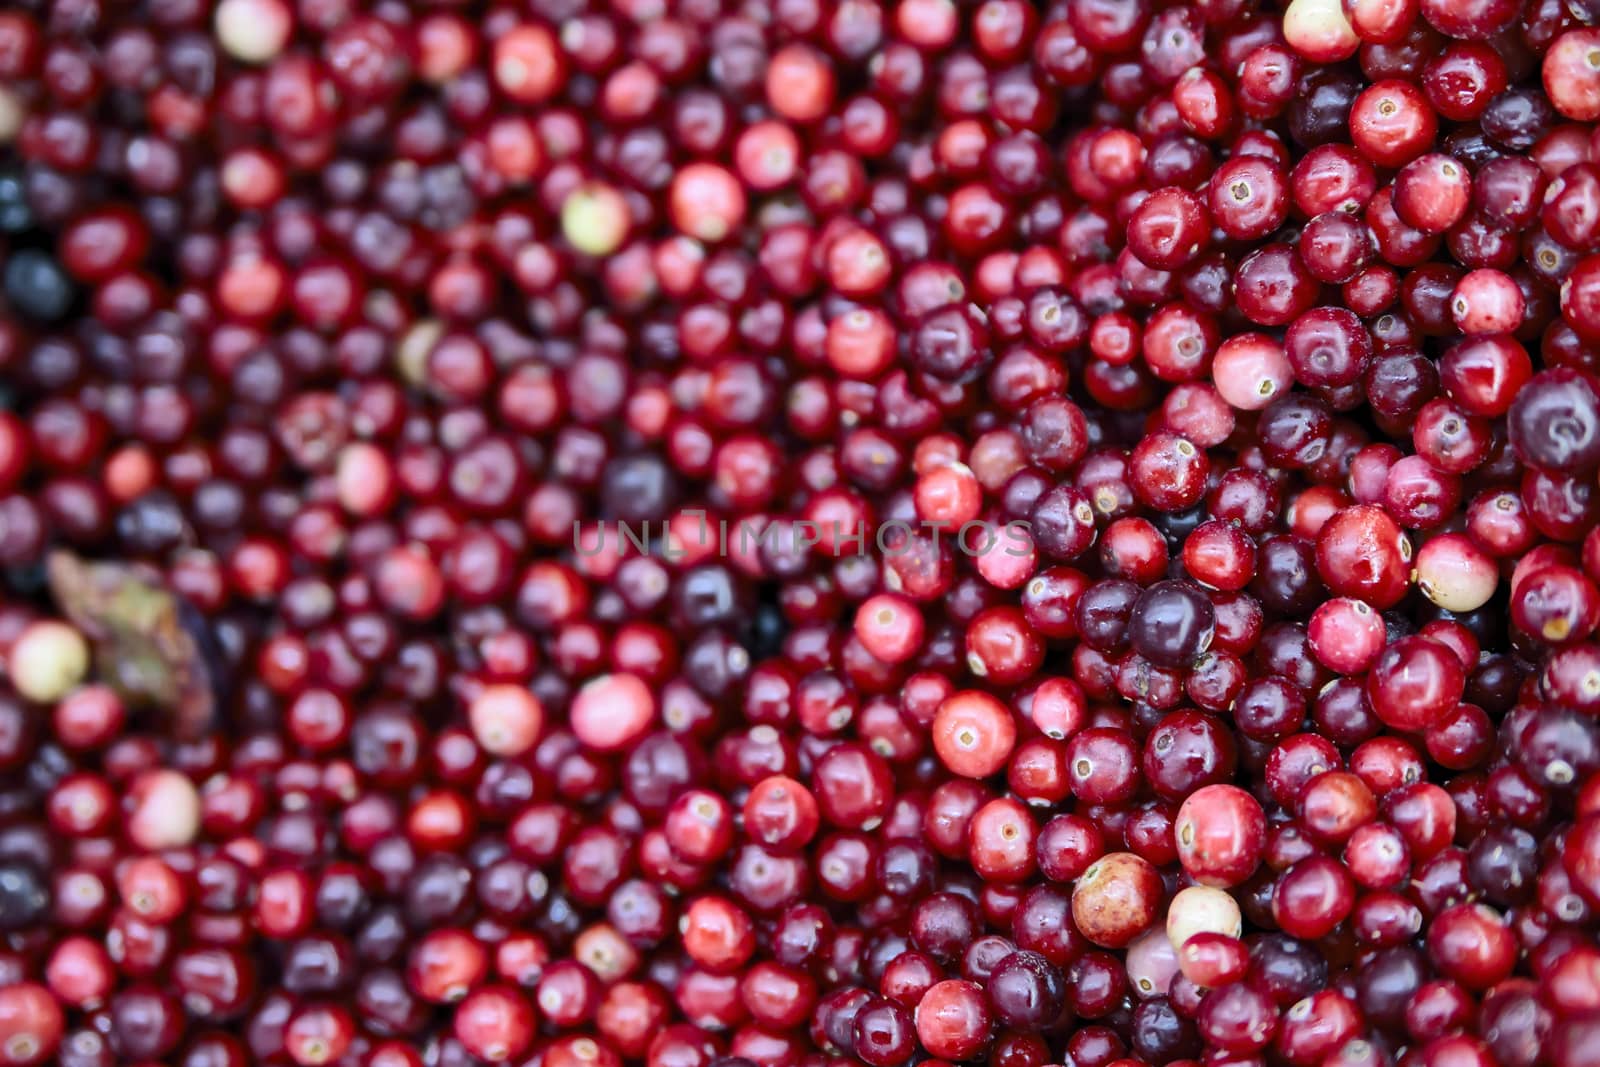 Frozen berries in grocery store shot close-up, blurred background. Bright red cranberries contain many vitamins and minerals, is a medicinal plant